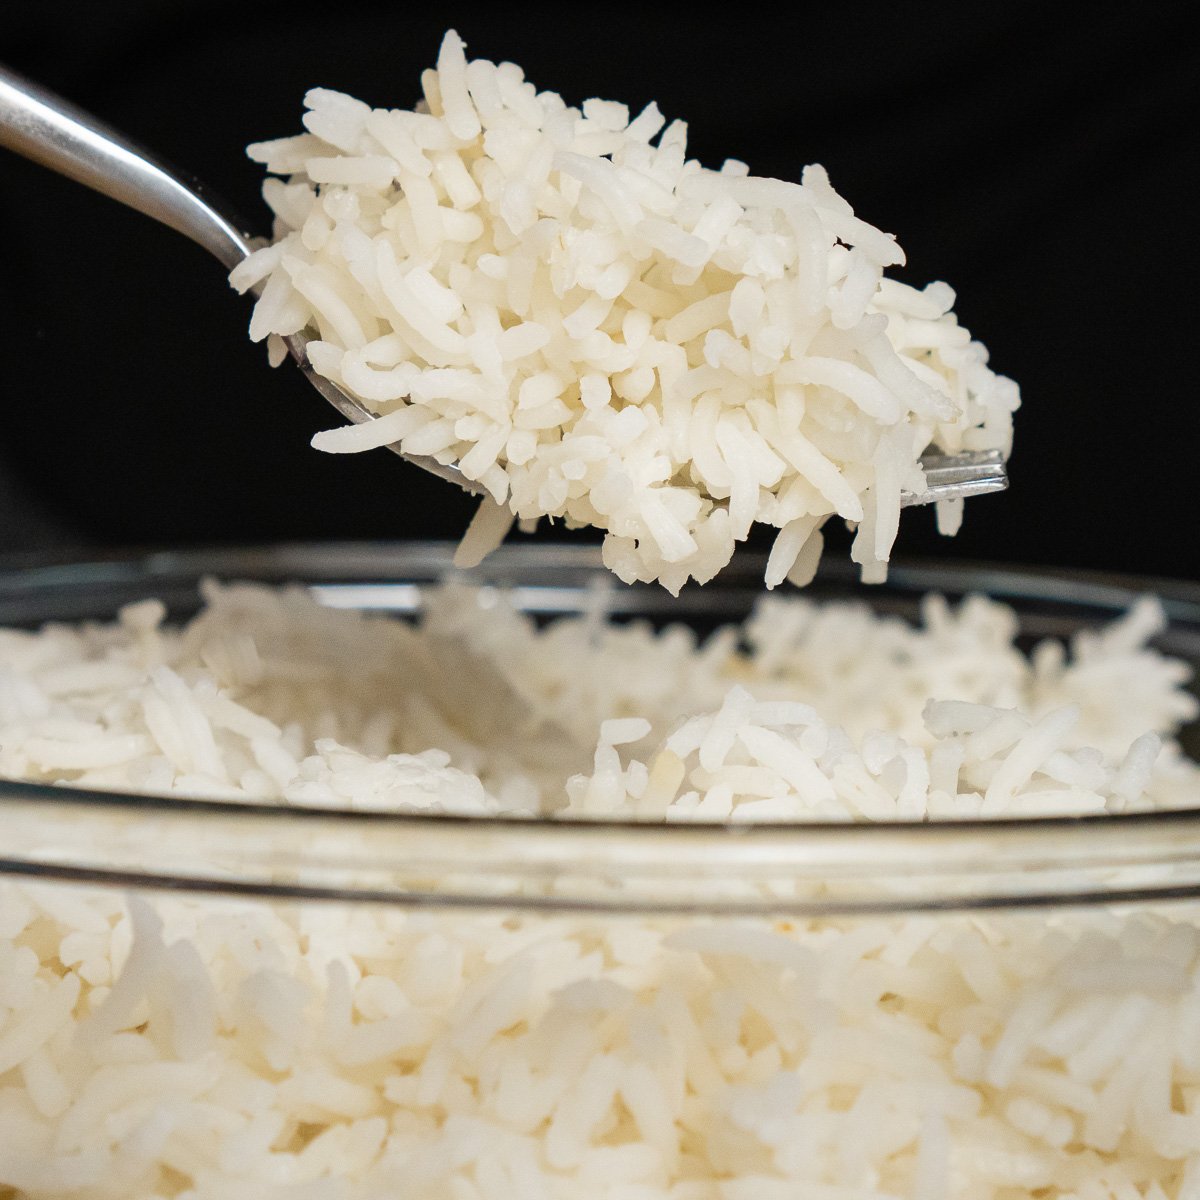 A spoon is being used to scoop rice out of a bowl.